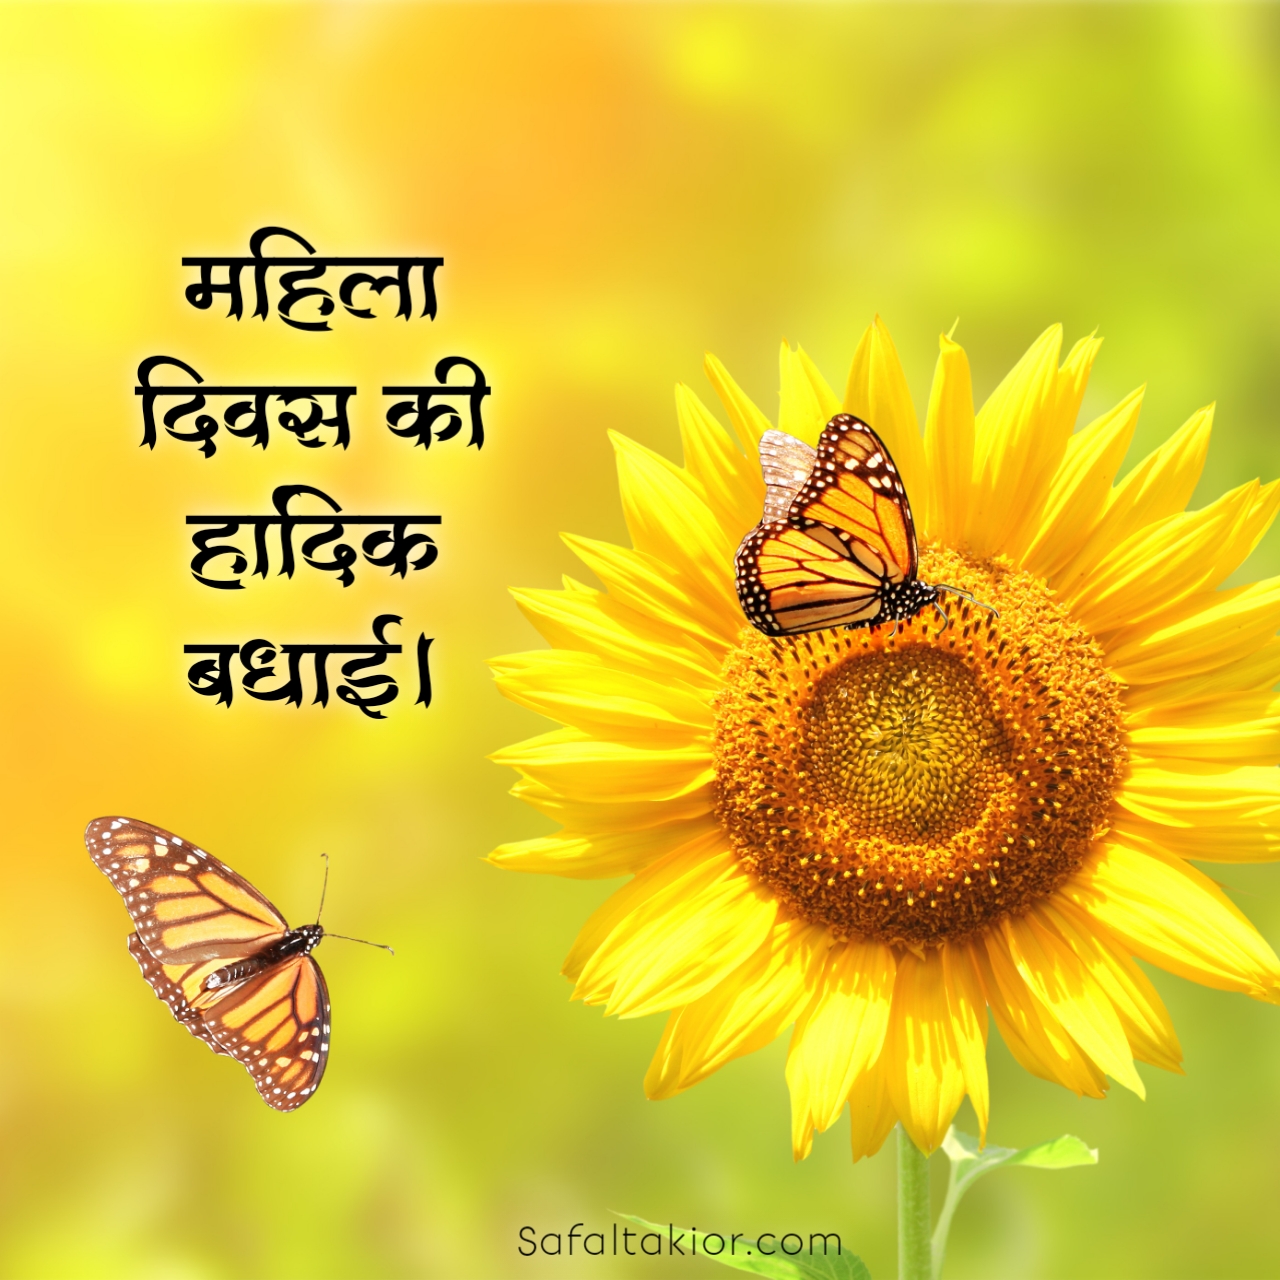 happy women's day images in hindi